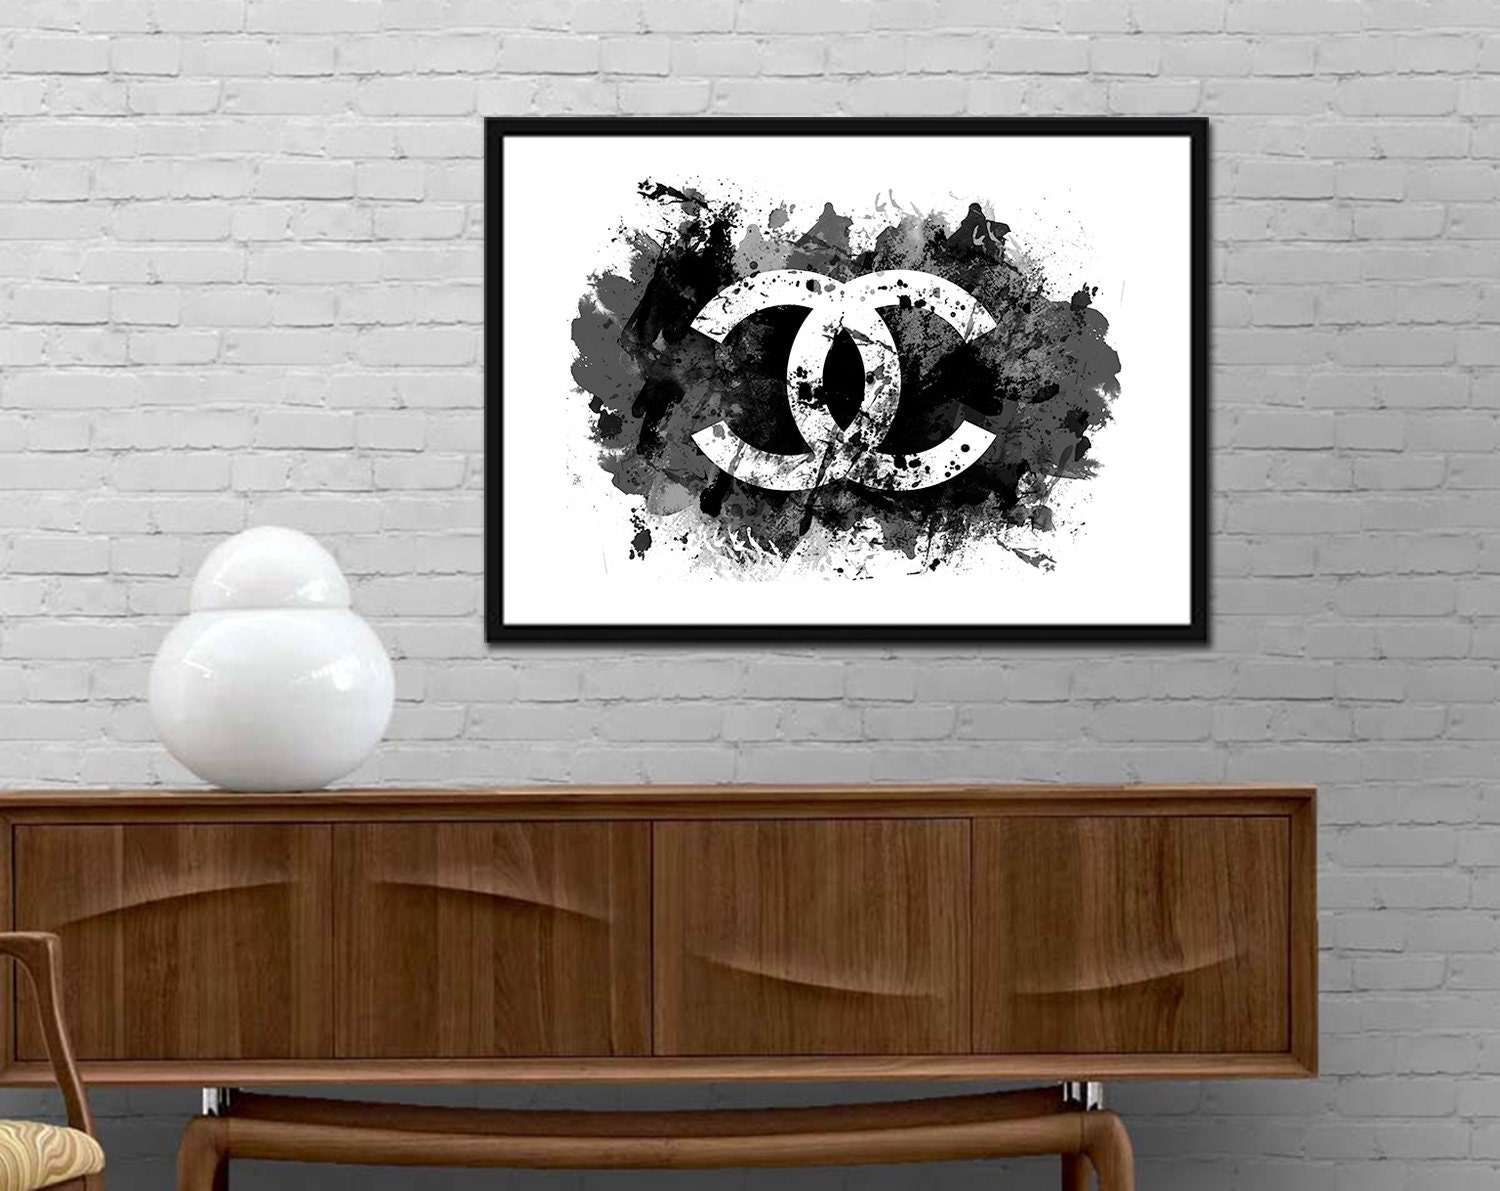  Chanel  Watercolor wall  art Chanel  Sign Modern Poster Brand